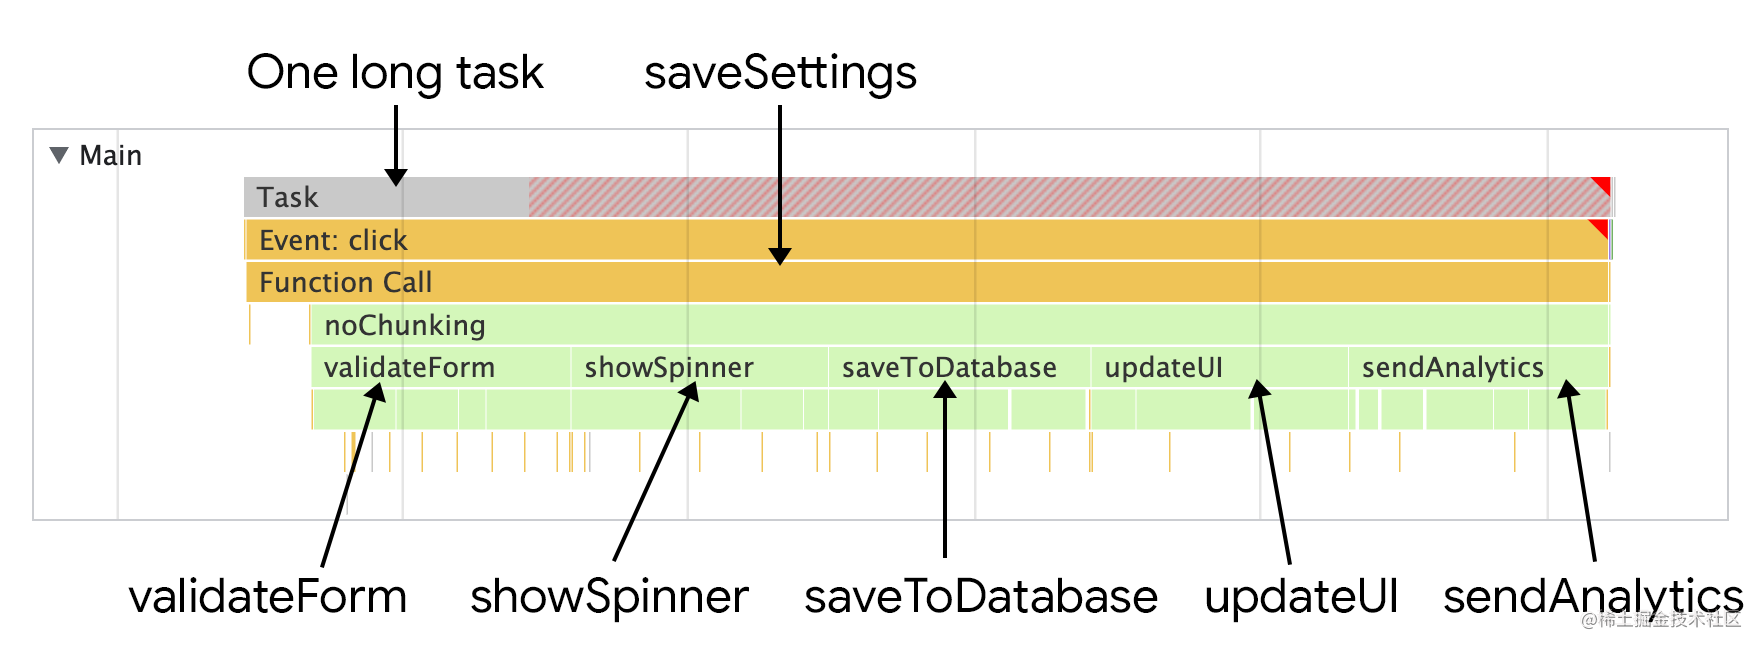 The saveSettings function as depicted in Chrome's performance profiler. While the top-level function calls five other functions, all the work takes place in one long task that blocks the main thread.